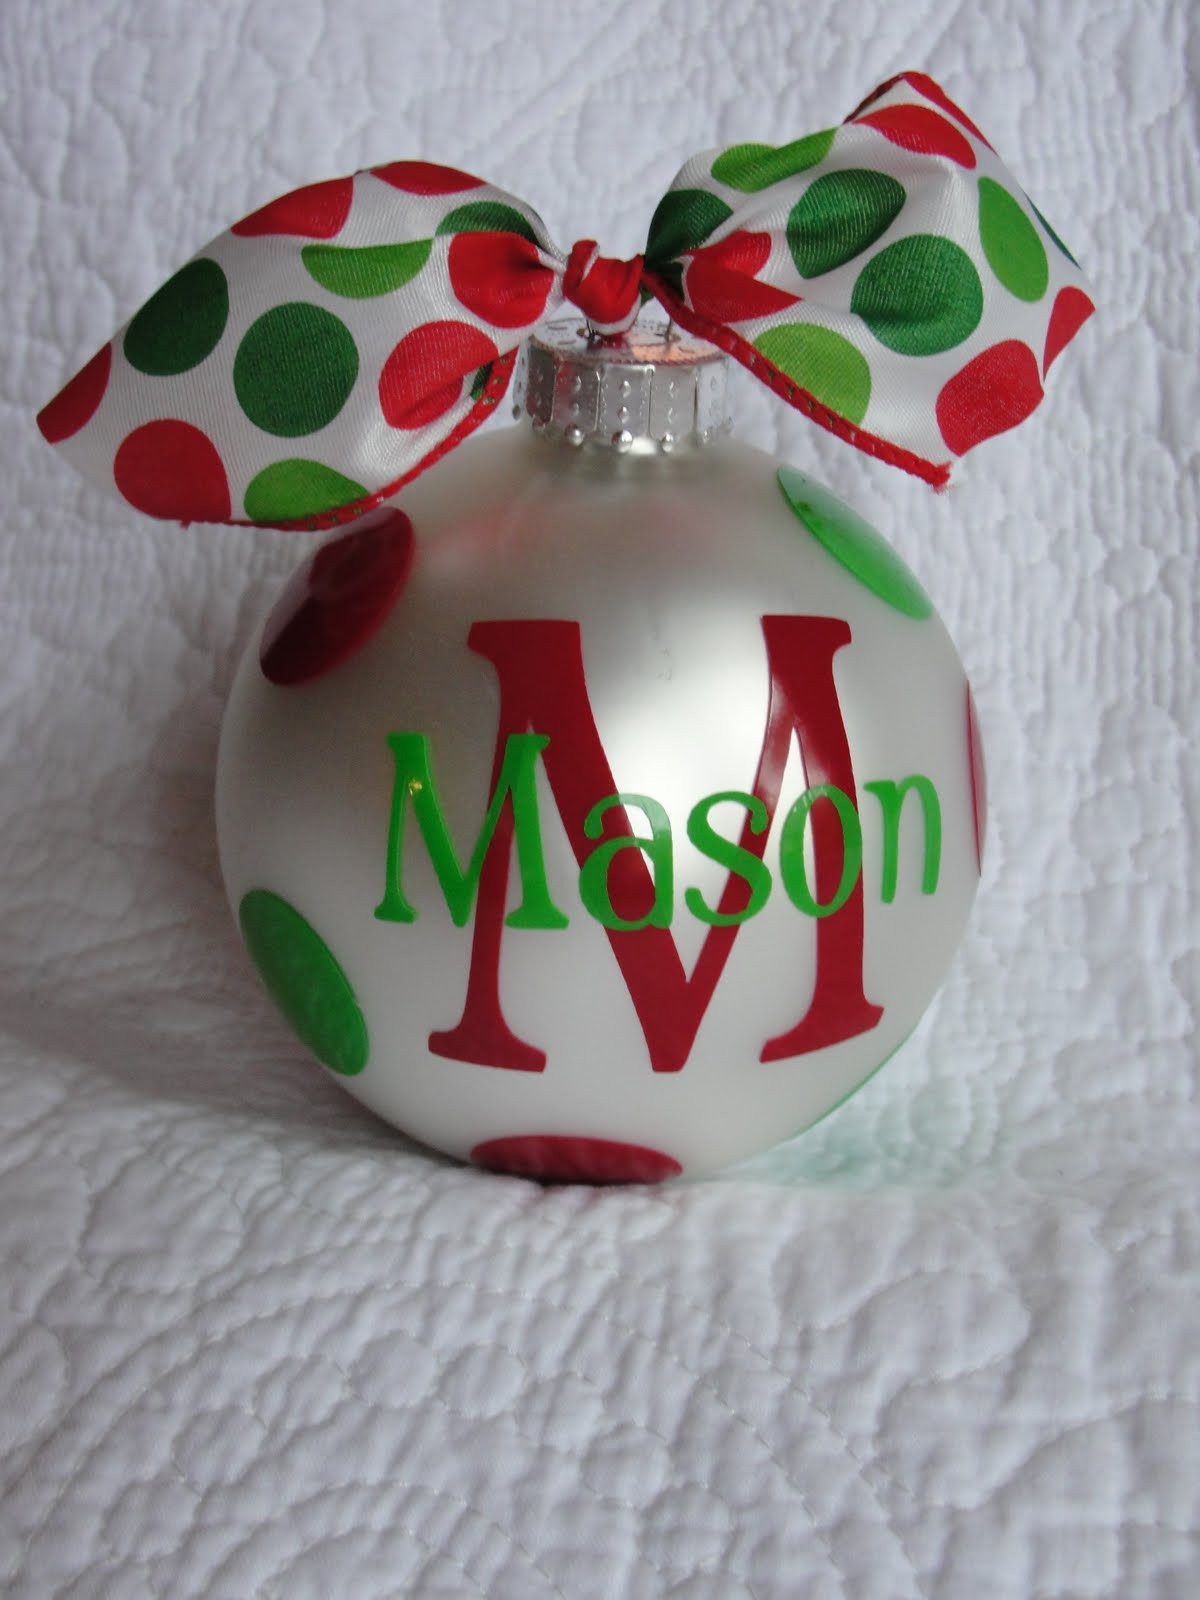 DIY Christmas Ornaments With Pictures
 Sassy Sites more than 130 Homemade Ornaments